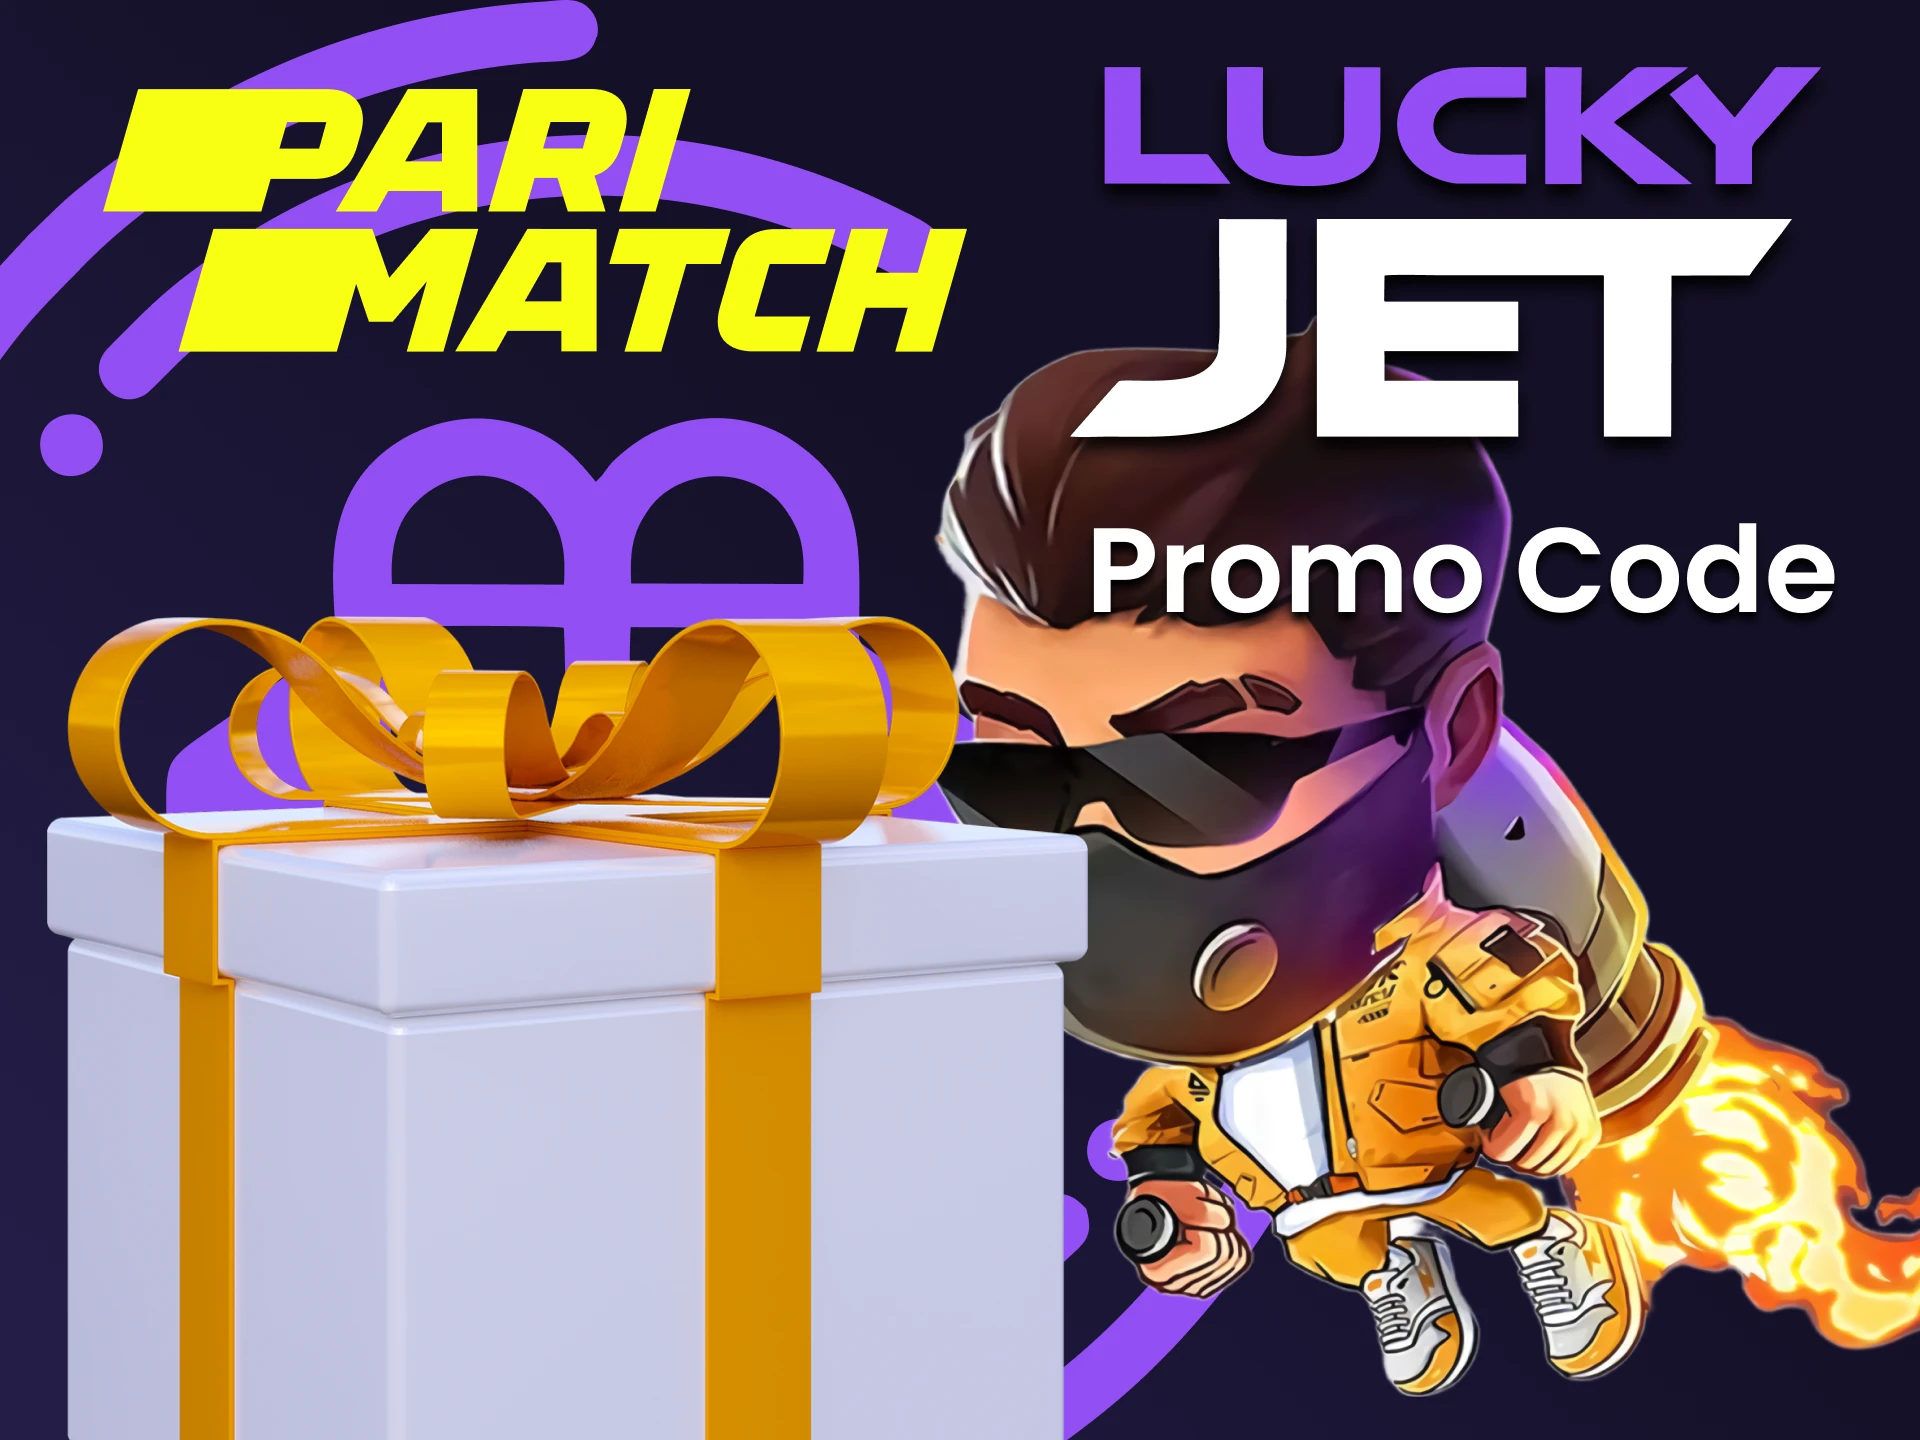 Get a bonus from Parimatch by entering a promo code for Lucky Jet.